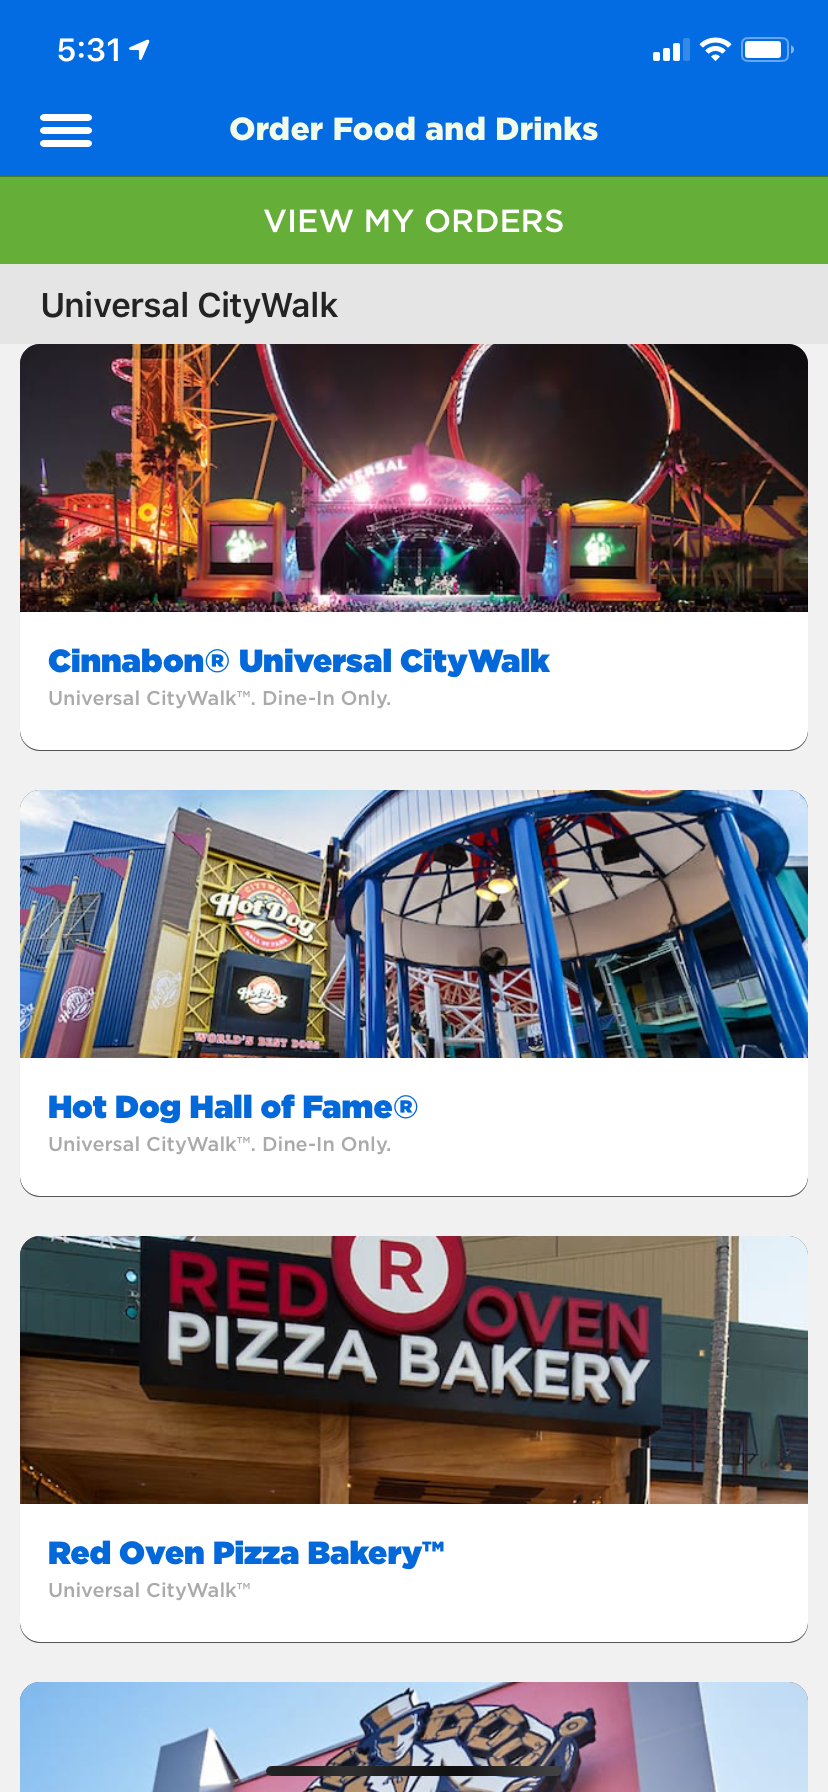 Mobile ordering on the Universal Orlando app